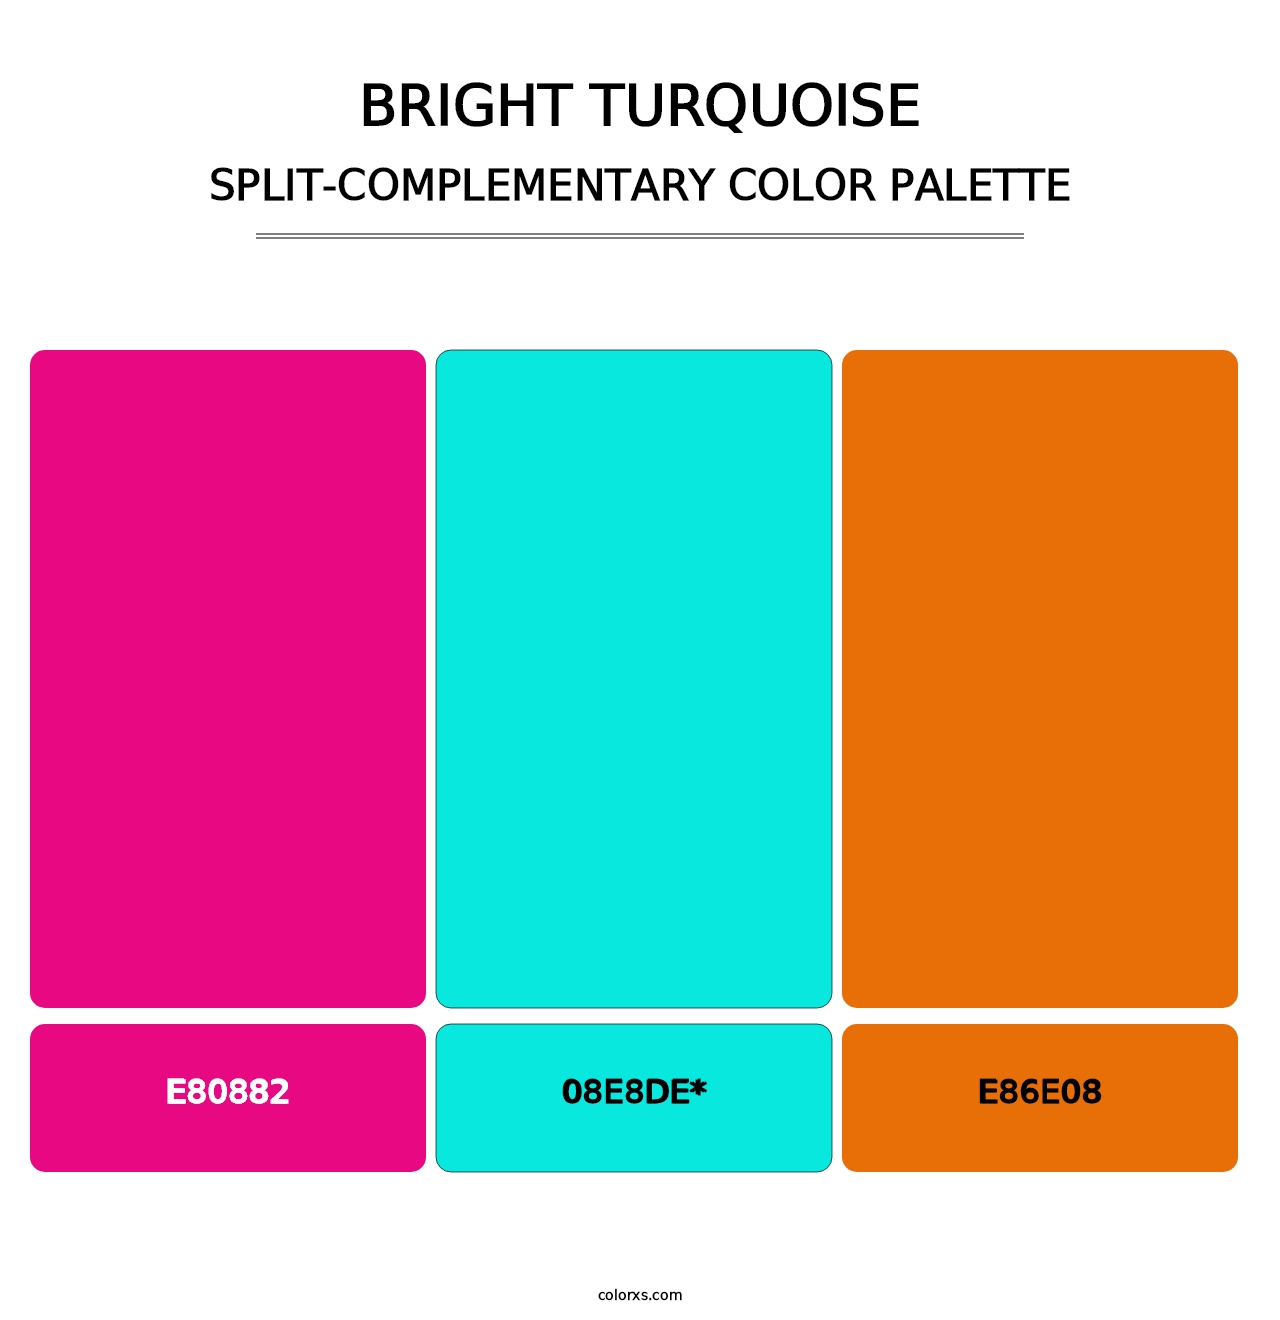 Bright Turquoise - Split-Complementary Color Palette